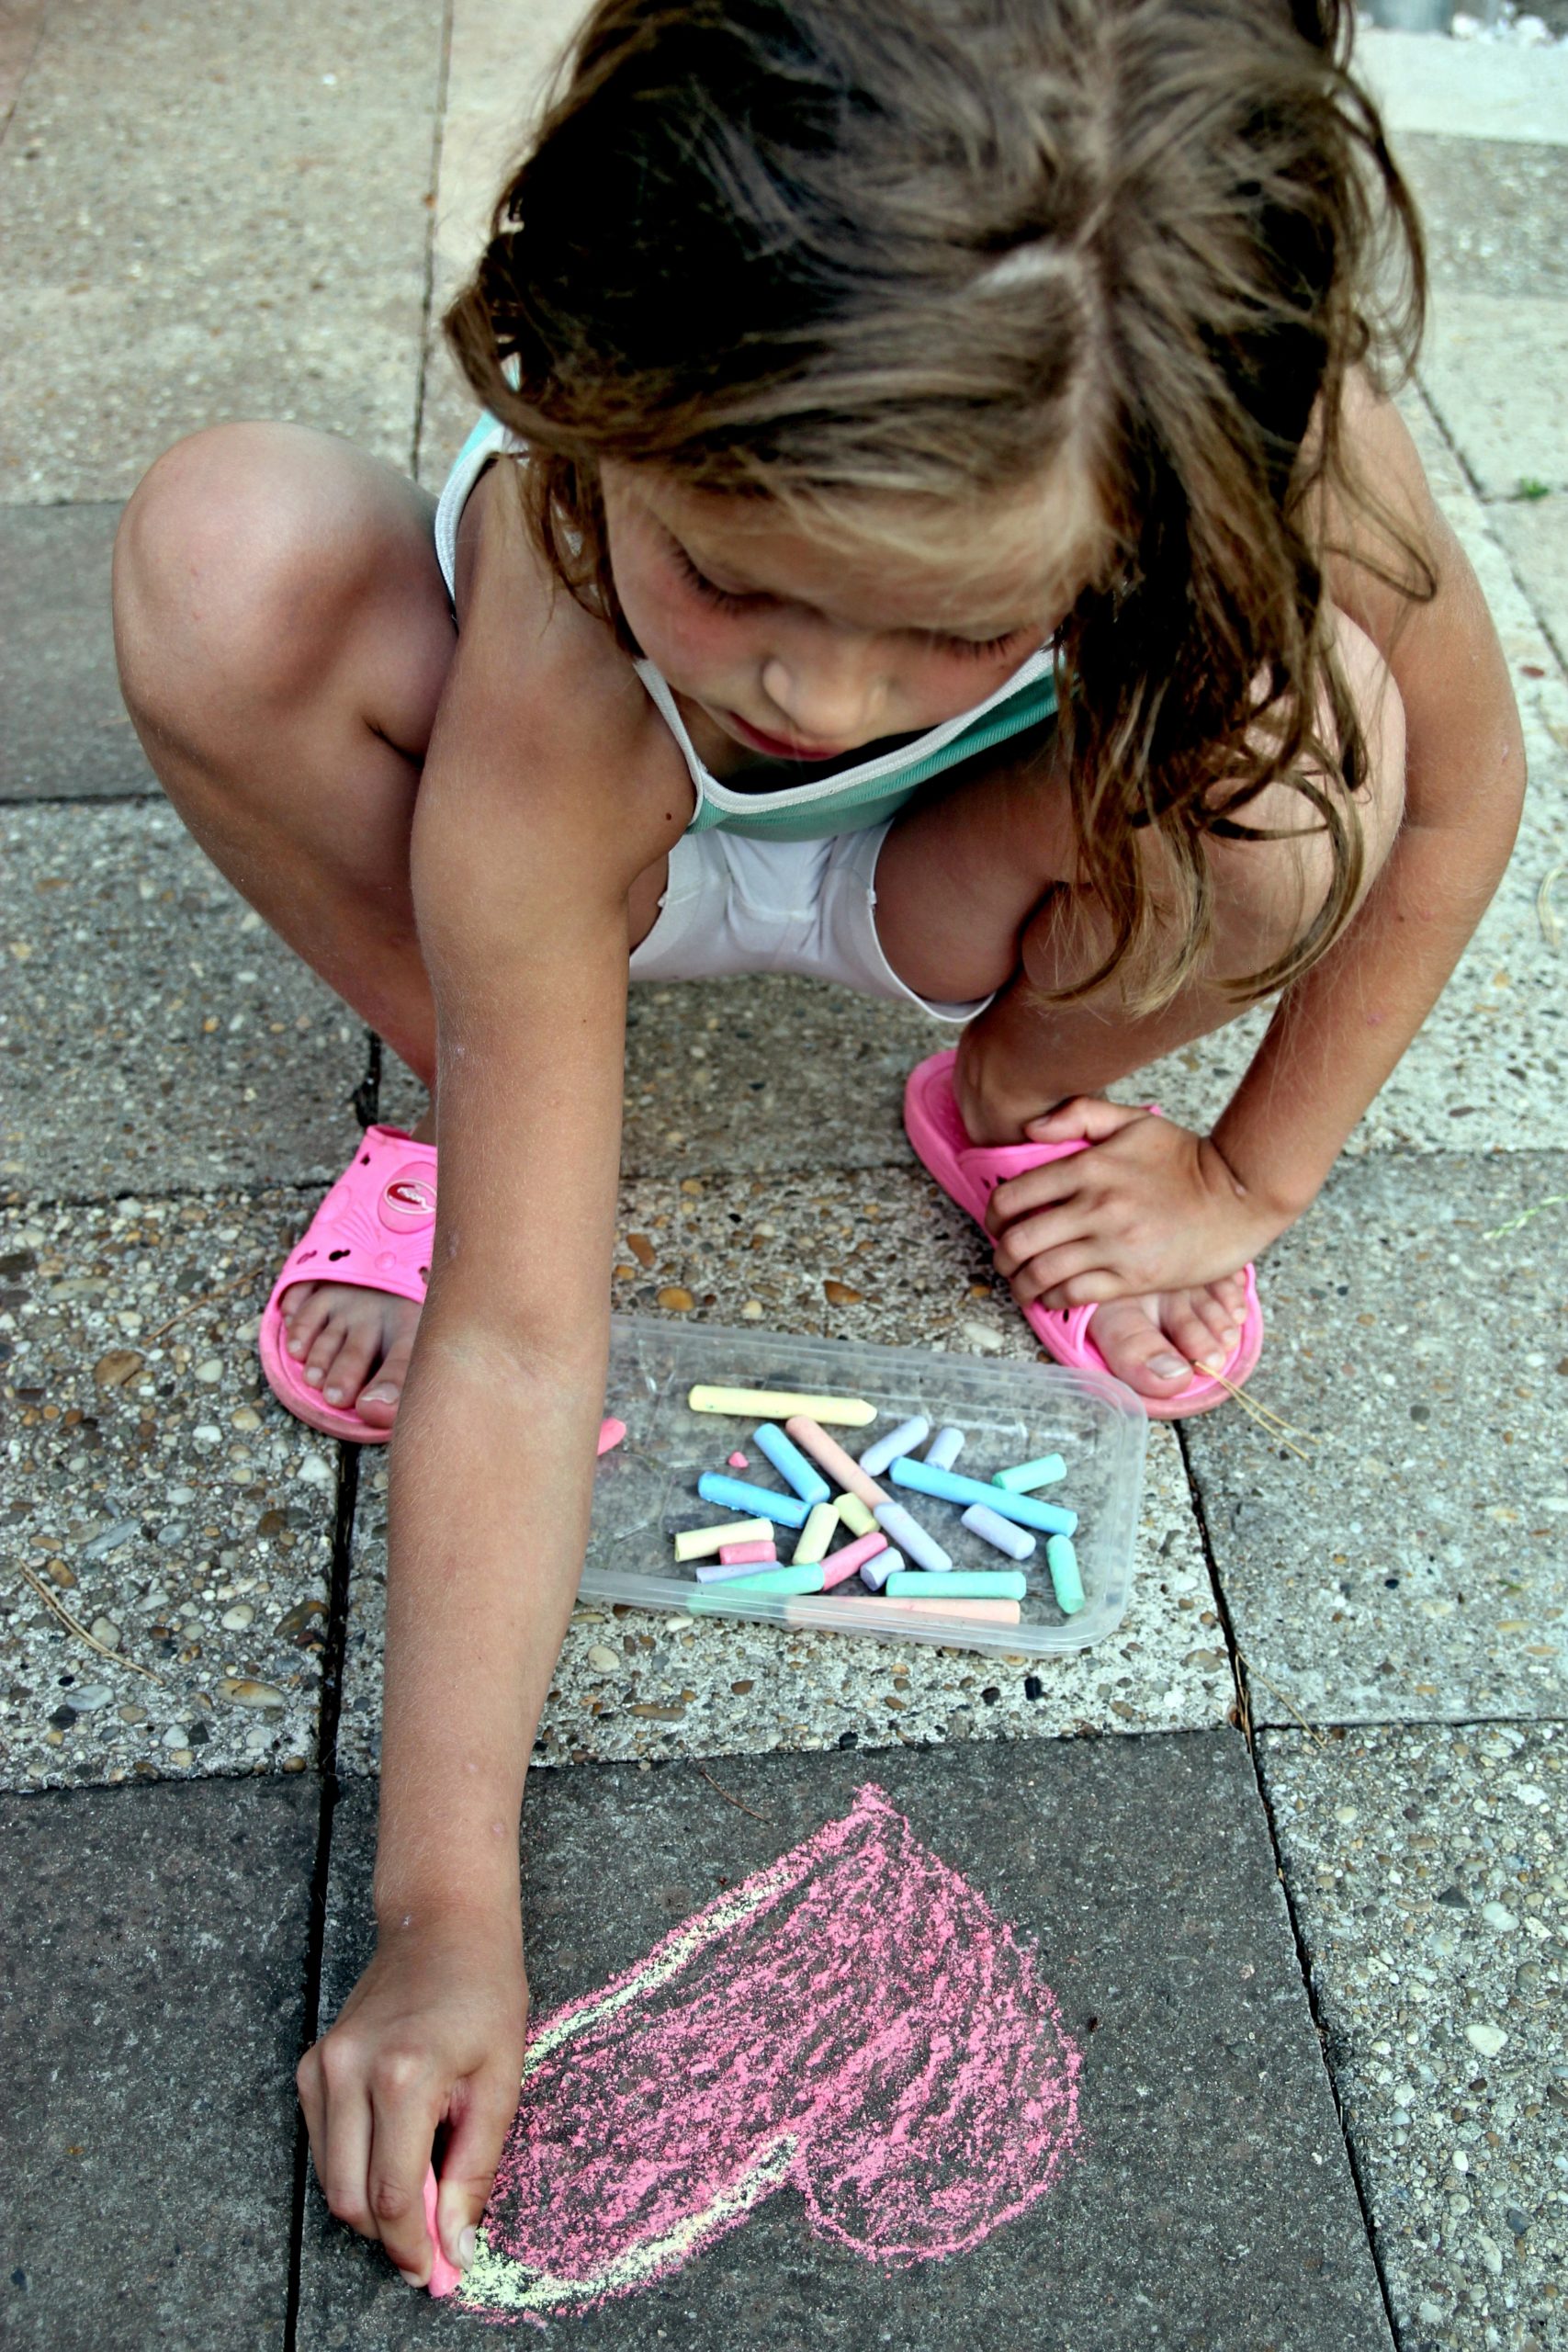 child creating a new picture on the sidewalk